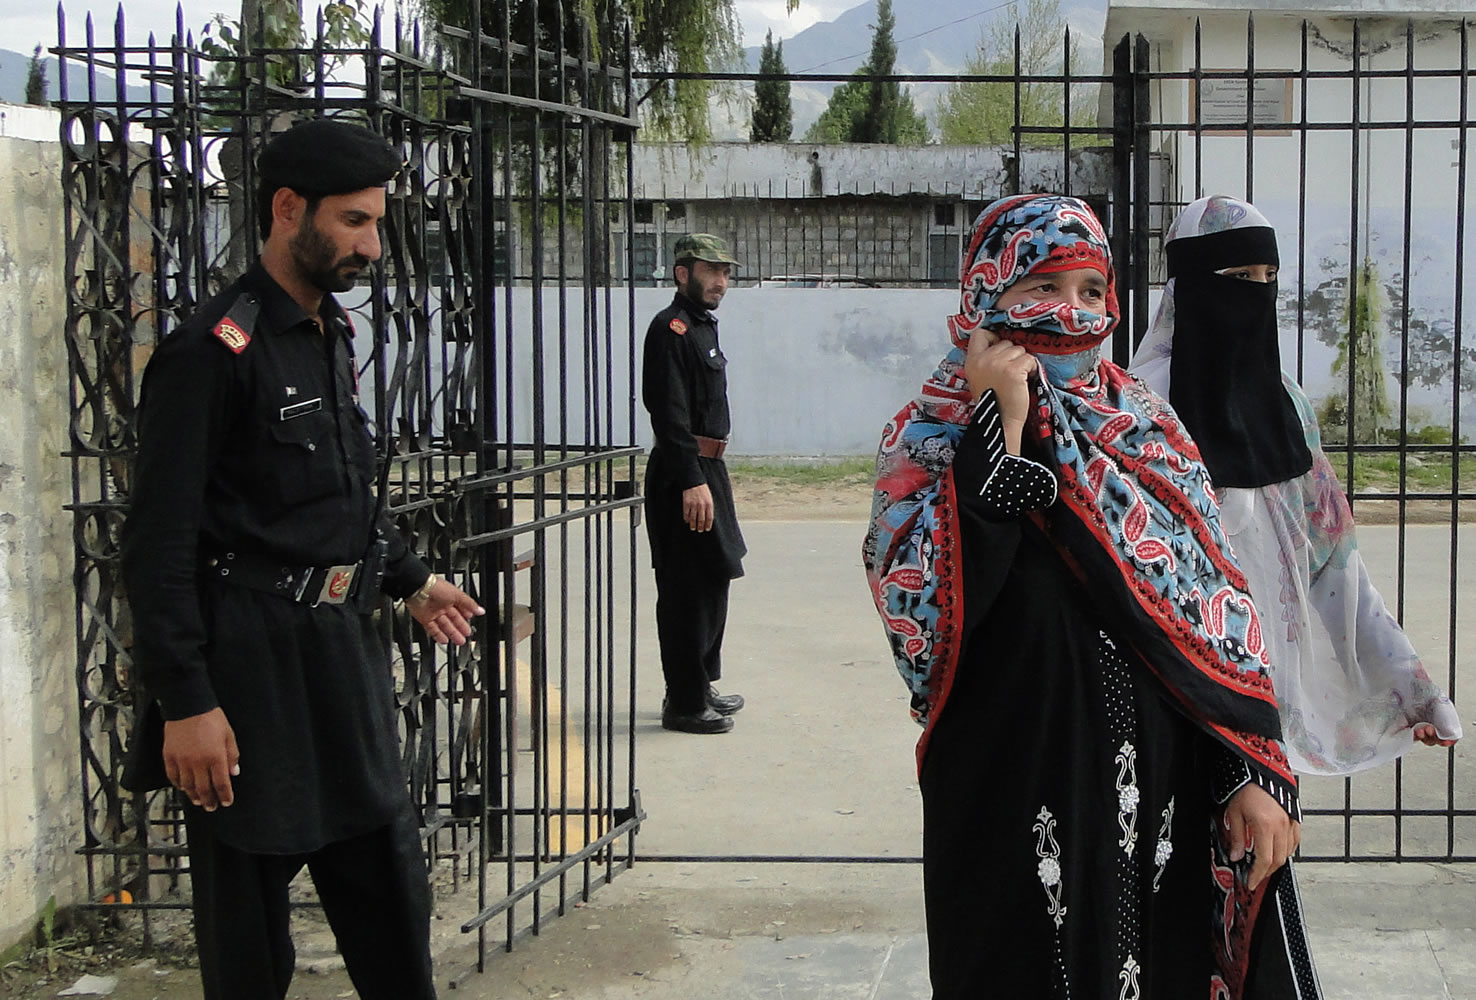 Badam Zari, second from right, leaves the election office after filing her candidacy for Parliament in Khar, capital of the Pakistani tribal area of Bajur, on Monday.